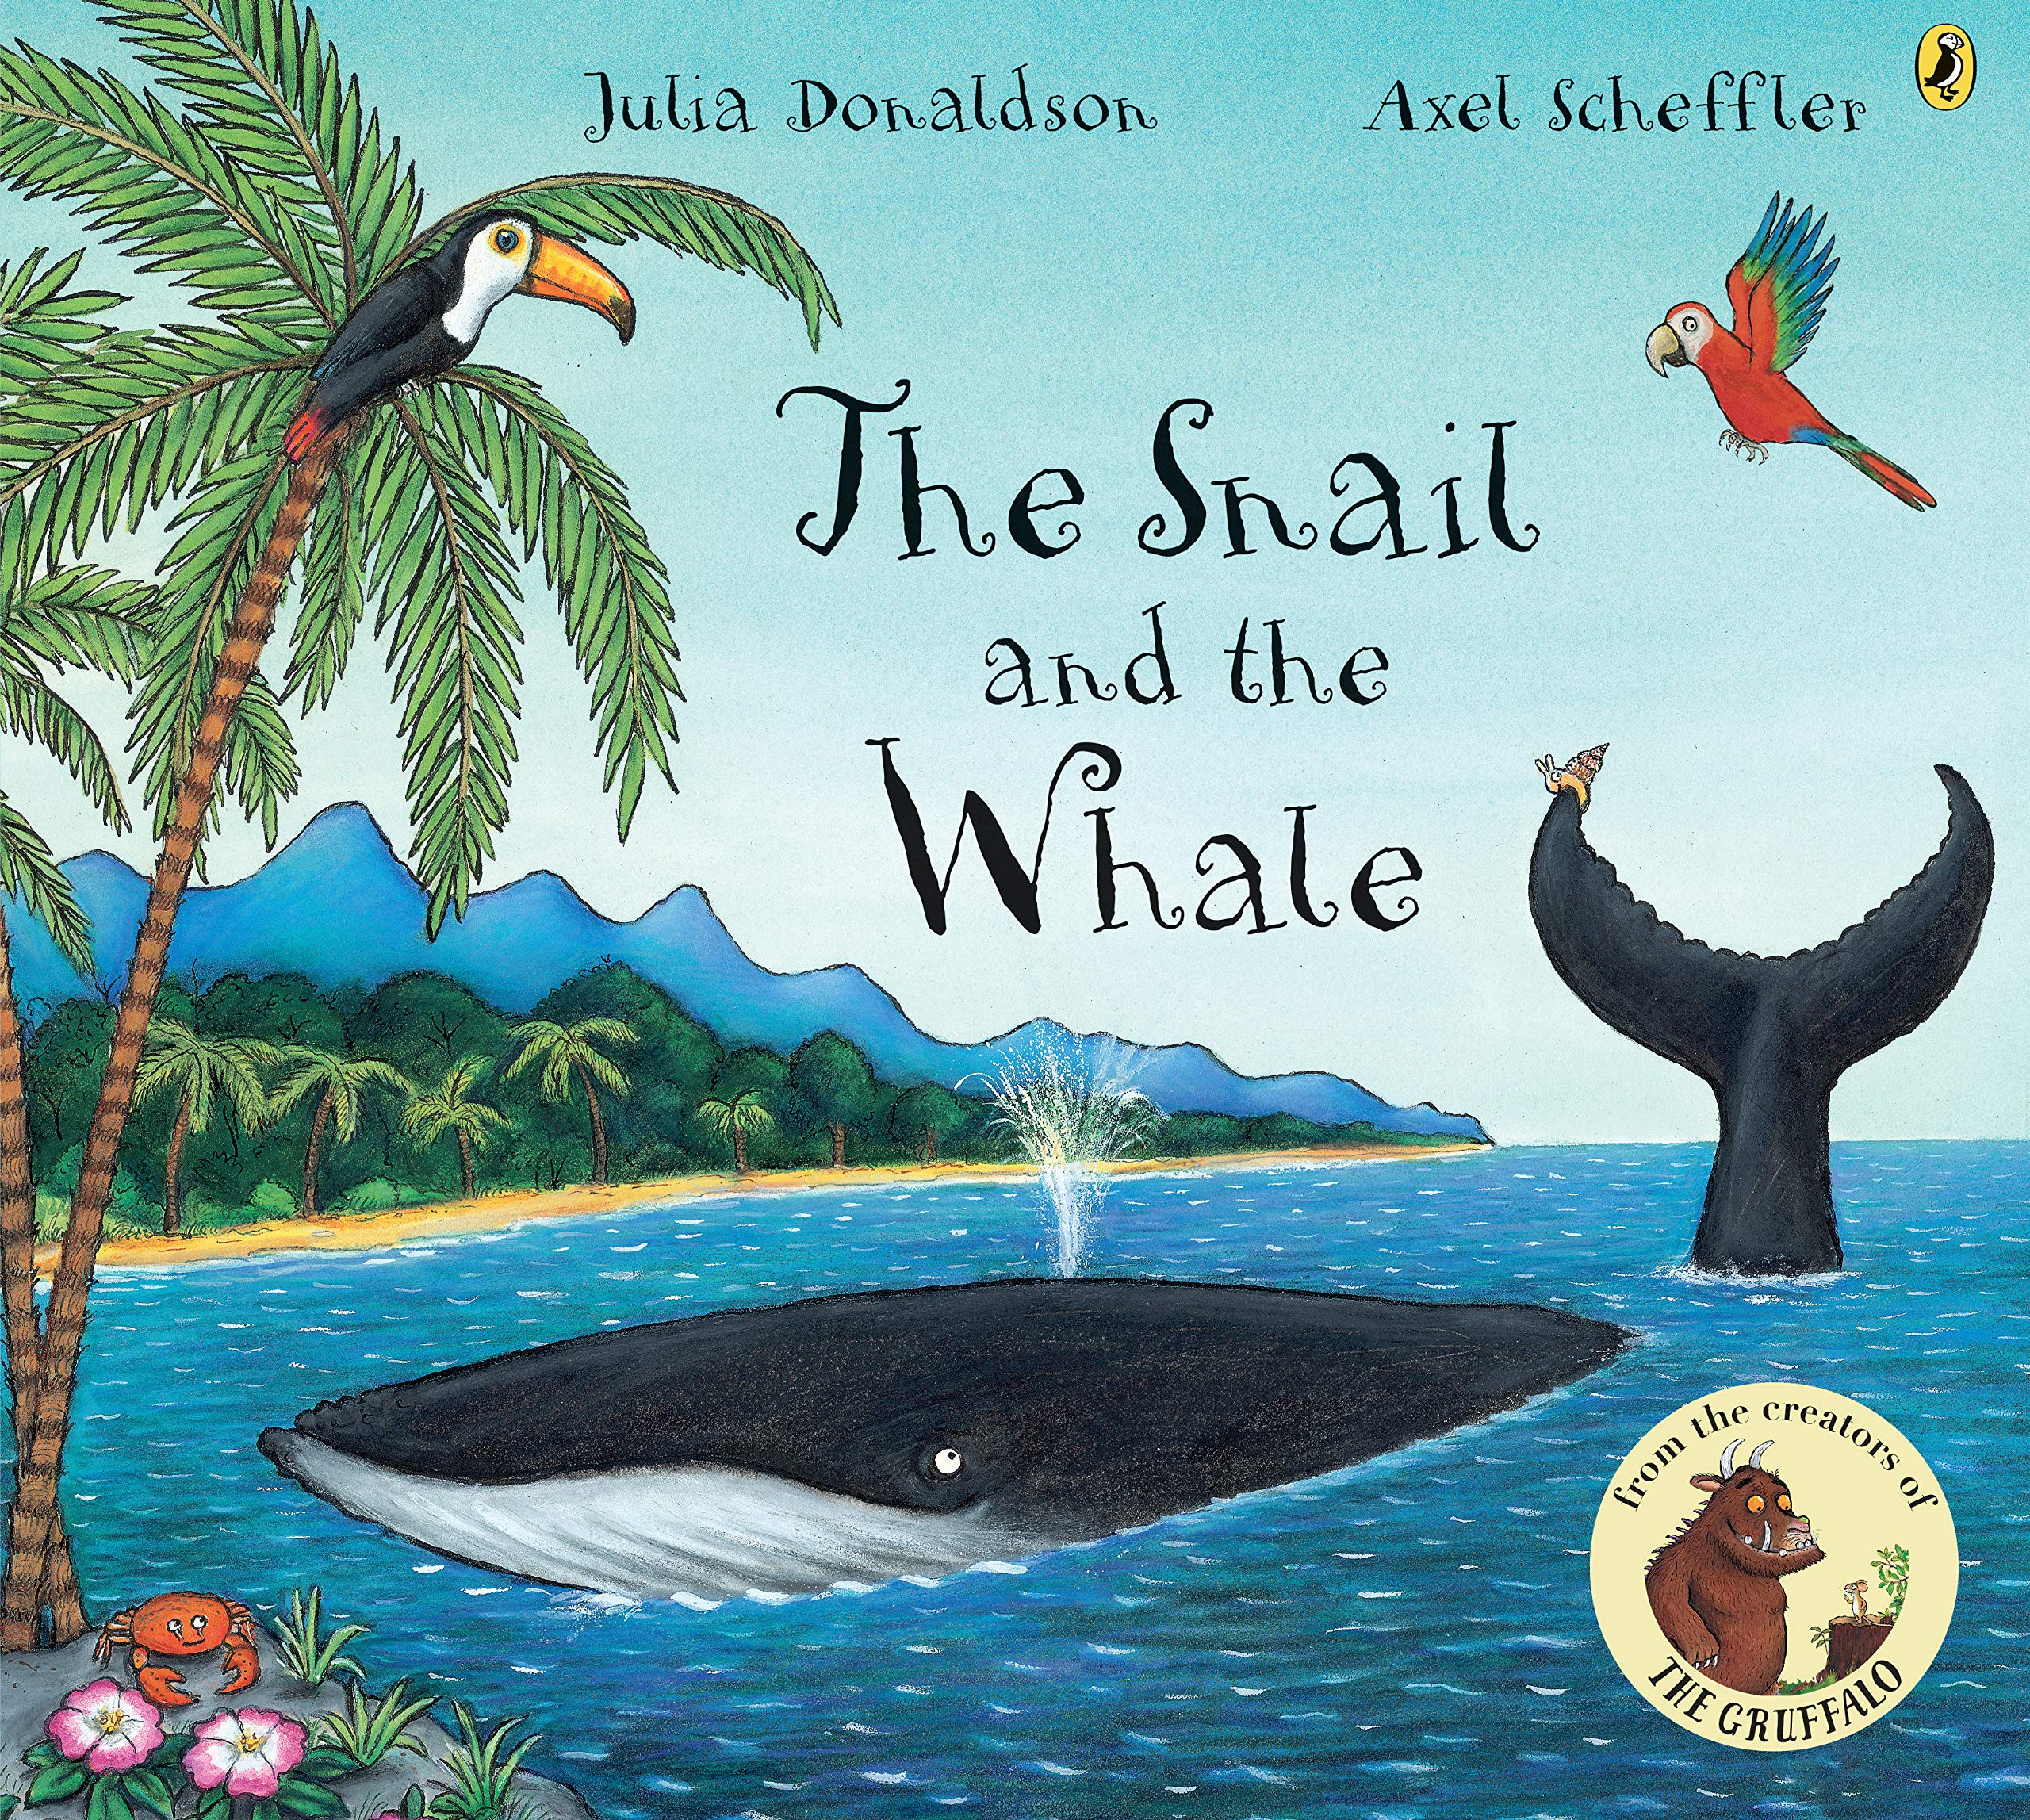 IMG : The Snail and the Whale